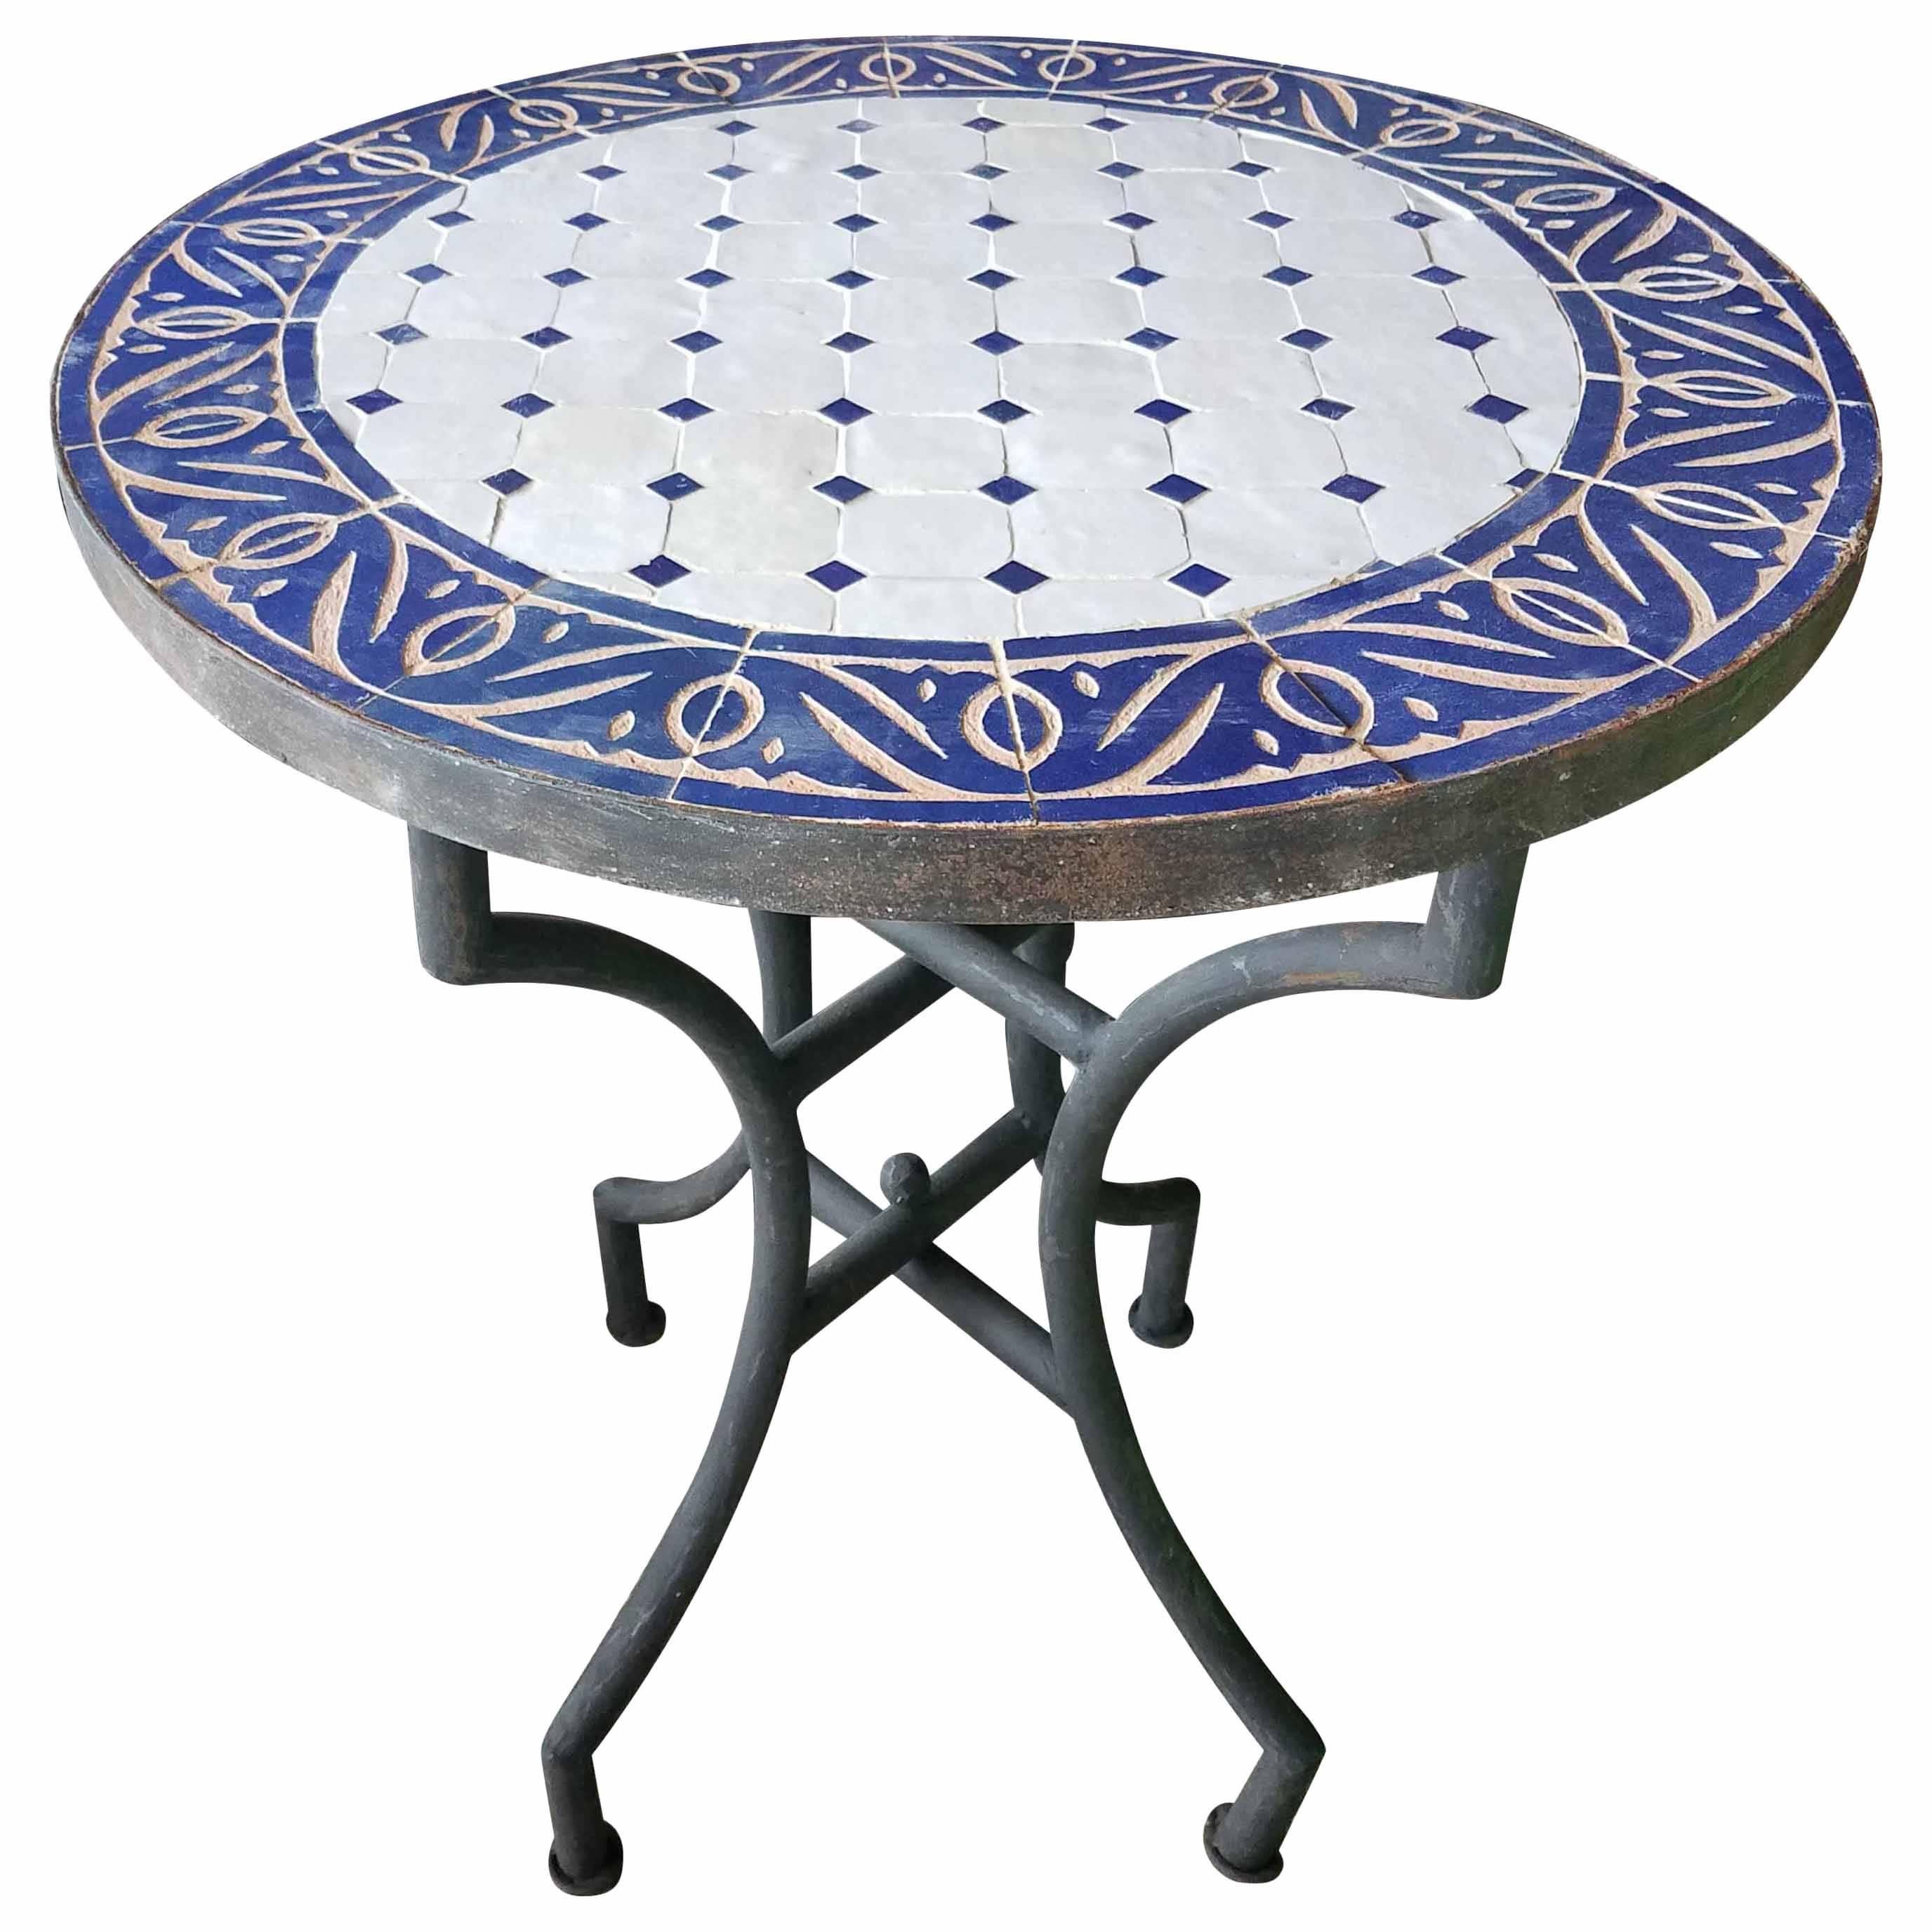 24" Blue / White Moroccan Mosaic Table - CR4 For Sale